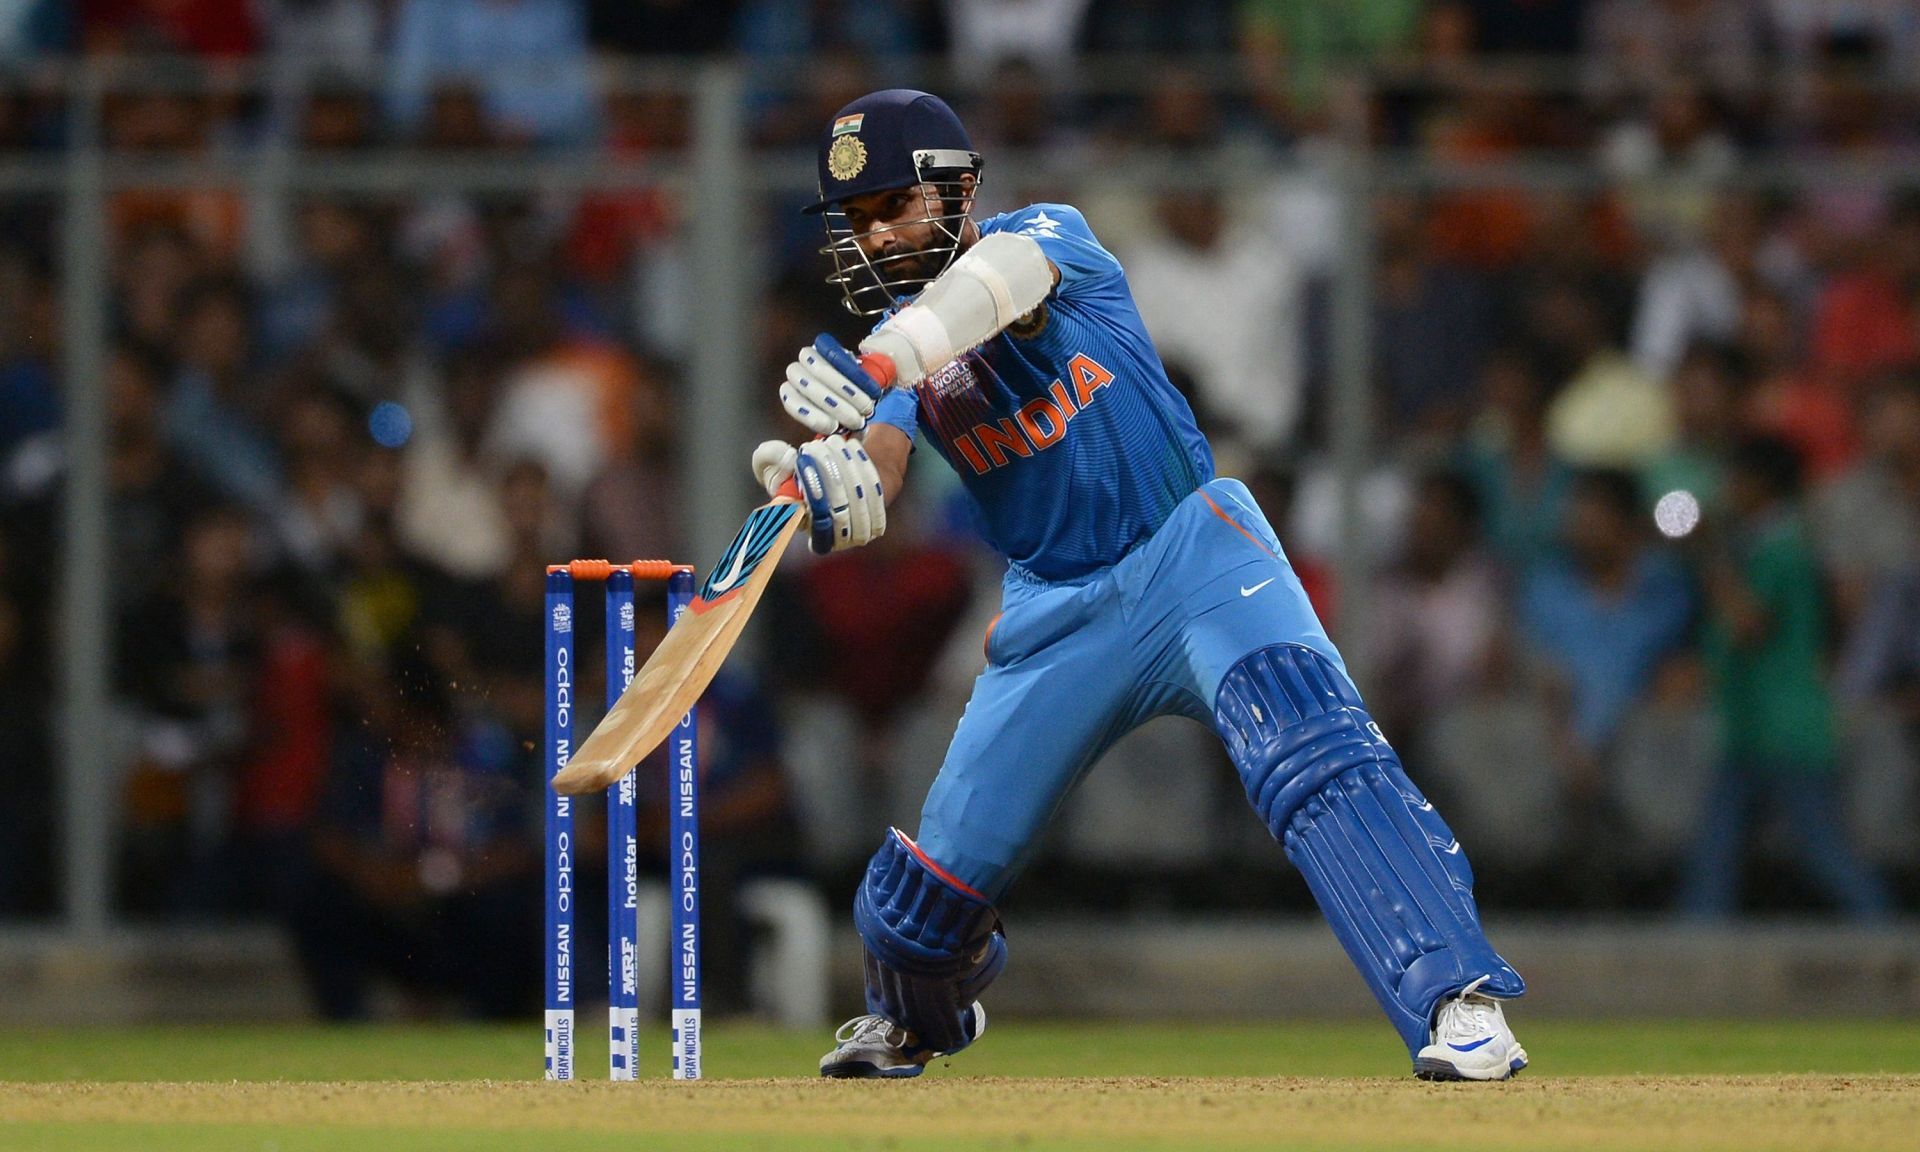 Ajinkya Rahane has done rather well in the T20 format. Pic: Getty Images